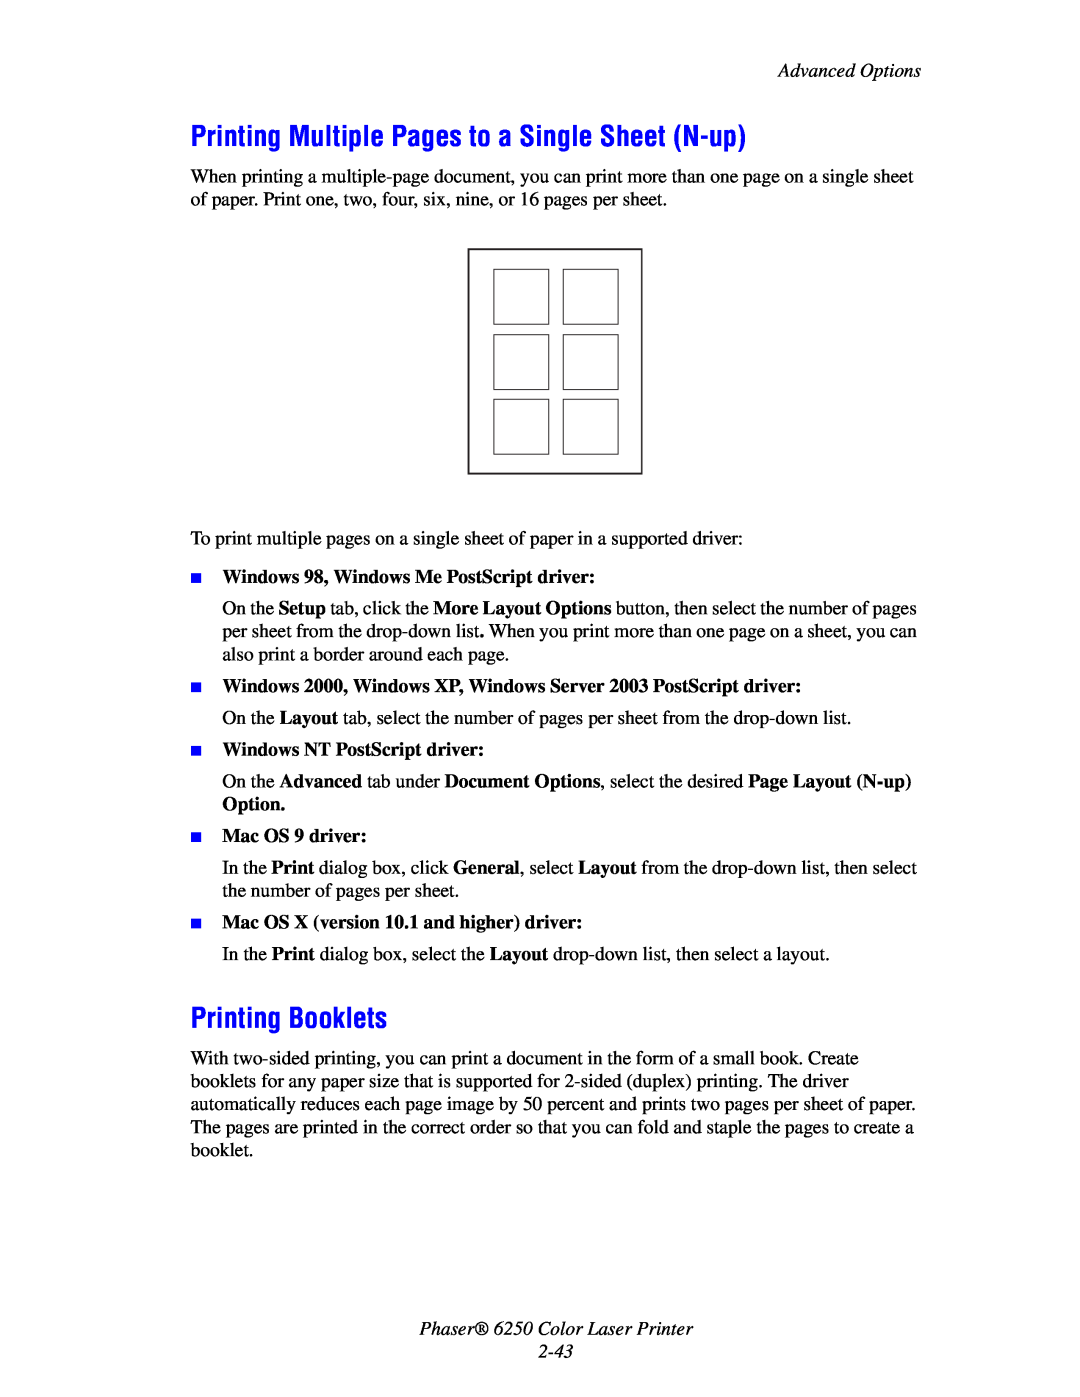 Xerox 6250 Printing Multiple Pages to a Single Sheet N-up, Printing Booklets, Advanced Options, Option Mac OS 9 driver 